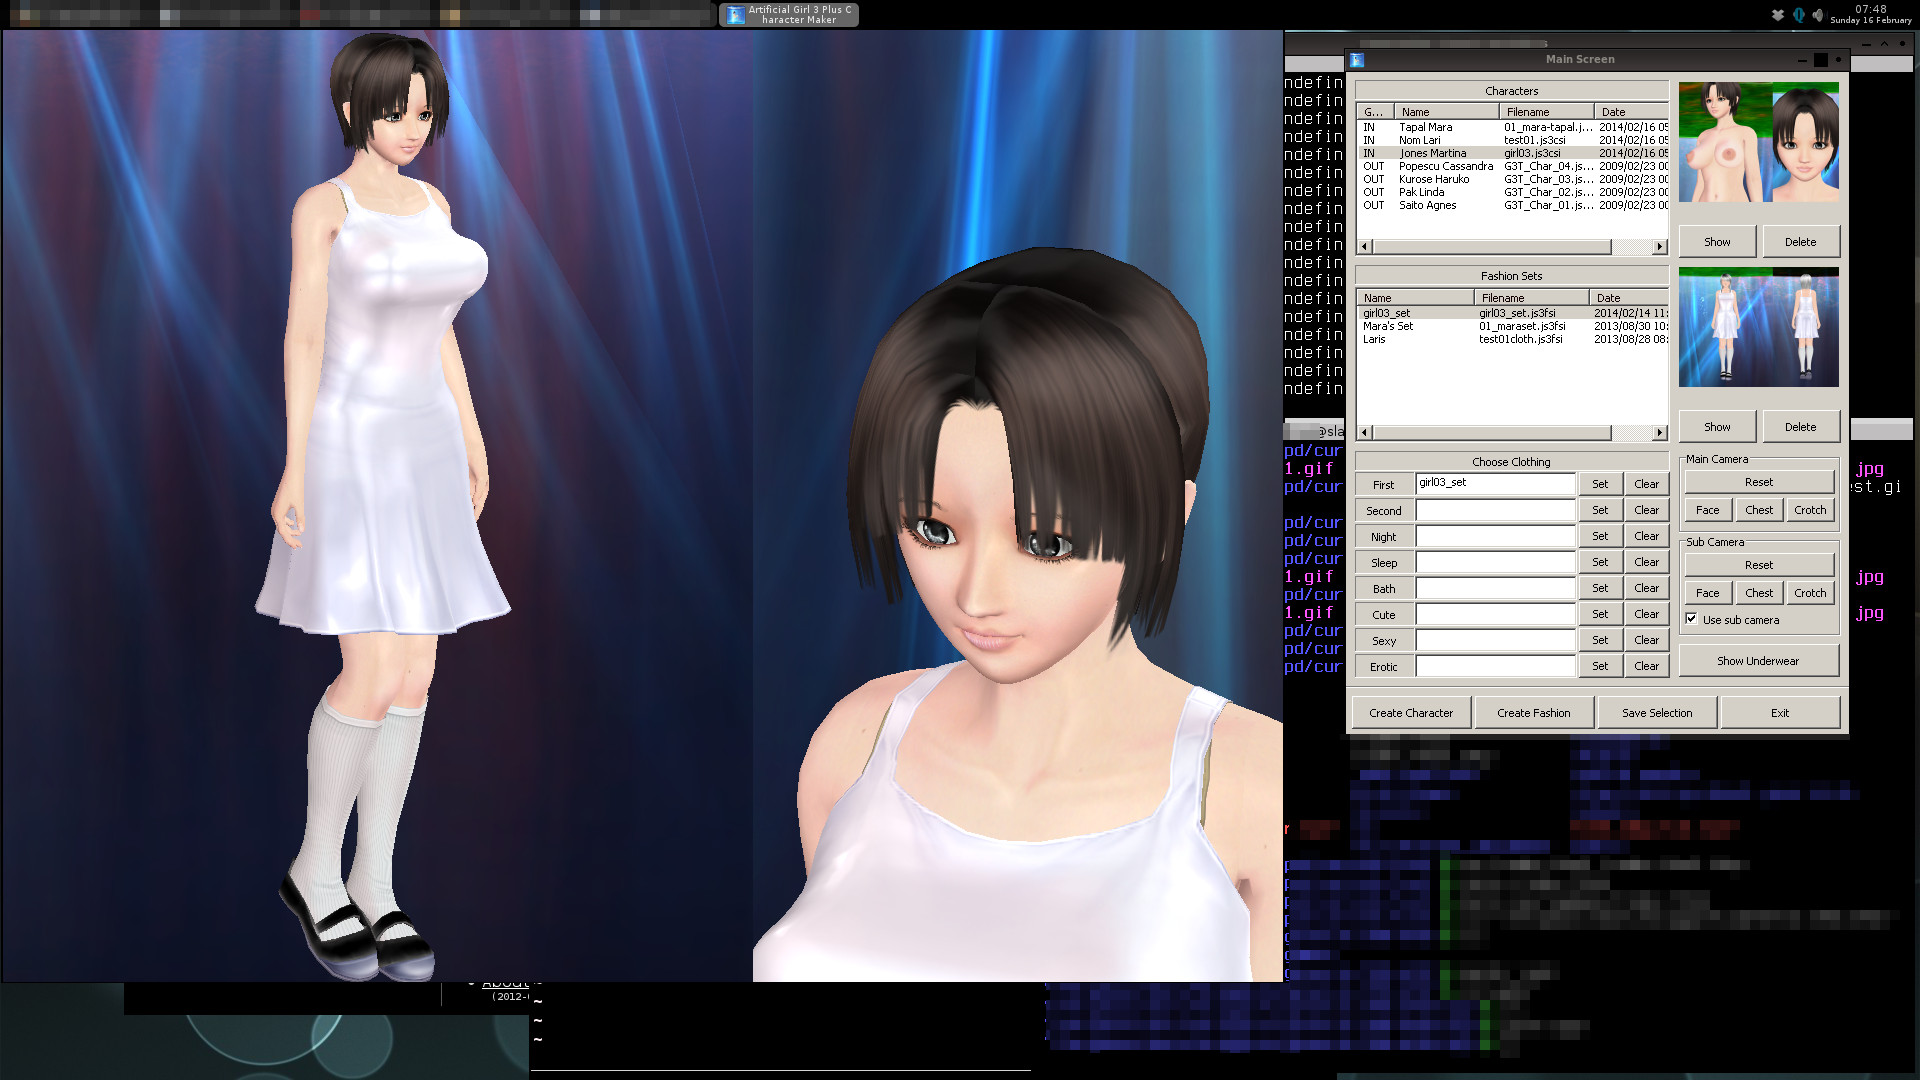 AG3 character editor with clothed model